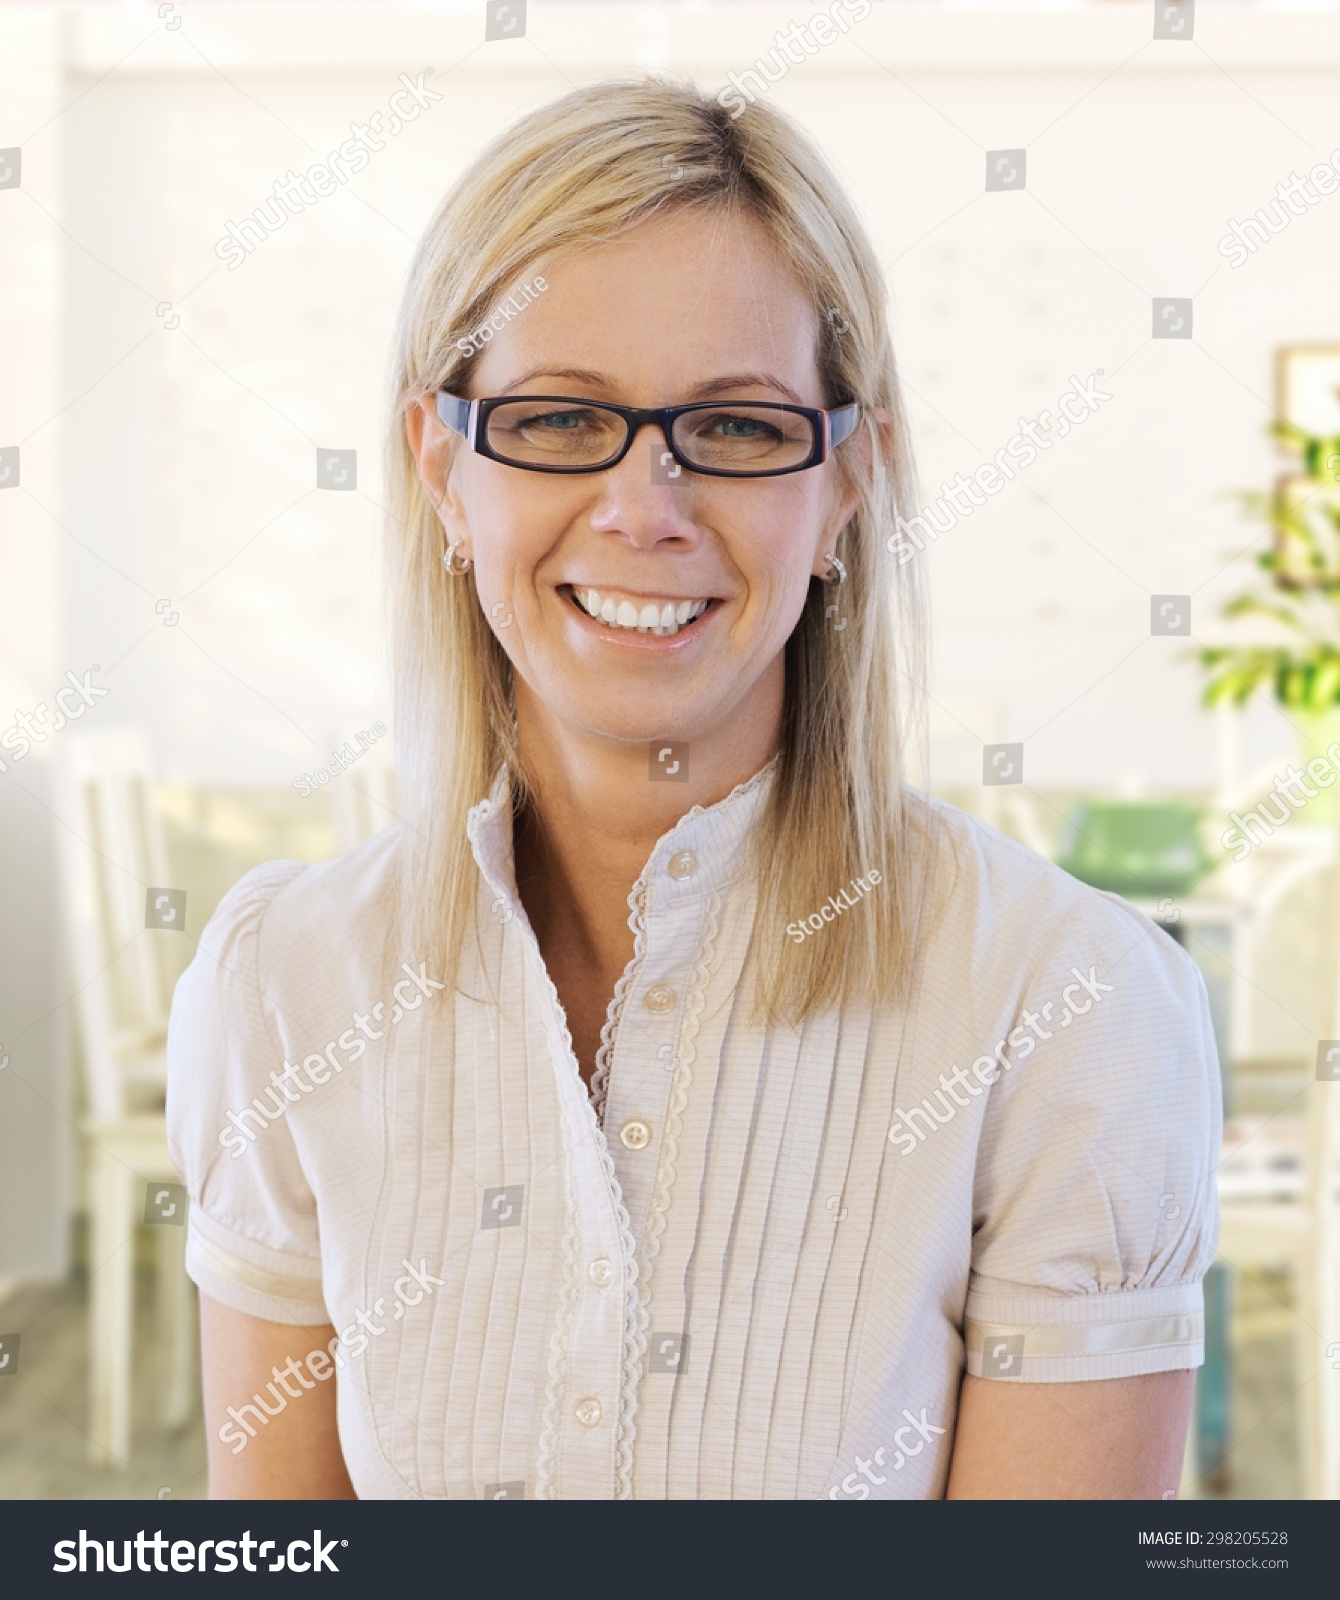 Portrait of middle-aged woman smiling happy, looking at camera. #298205528